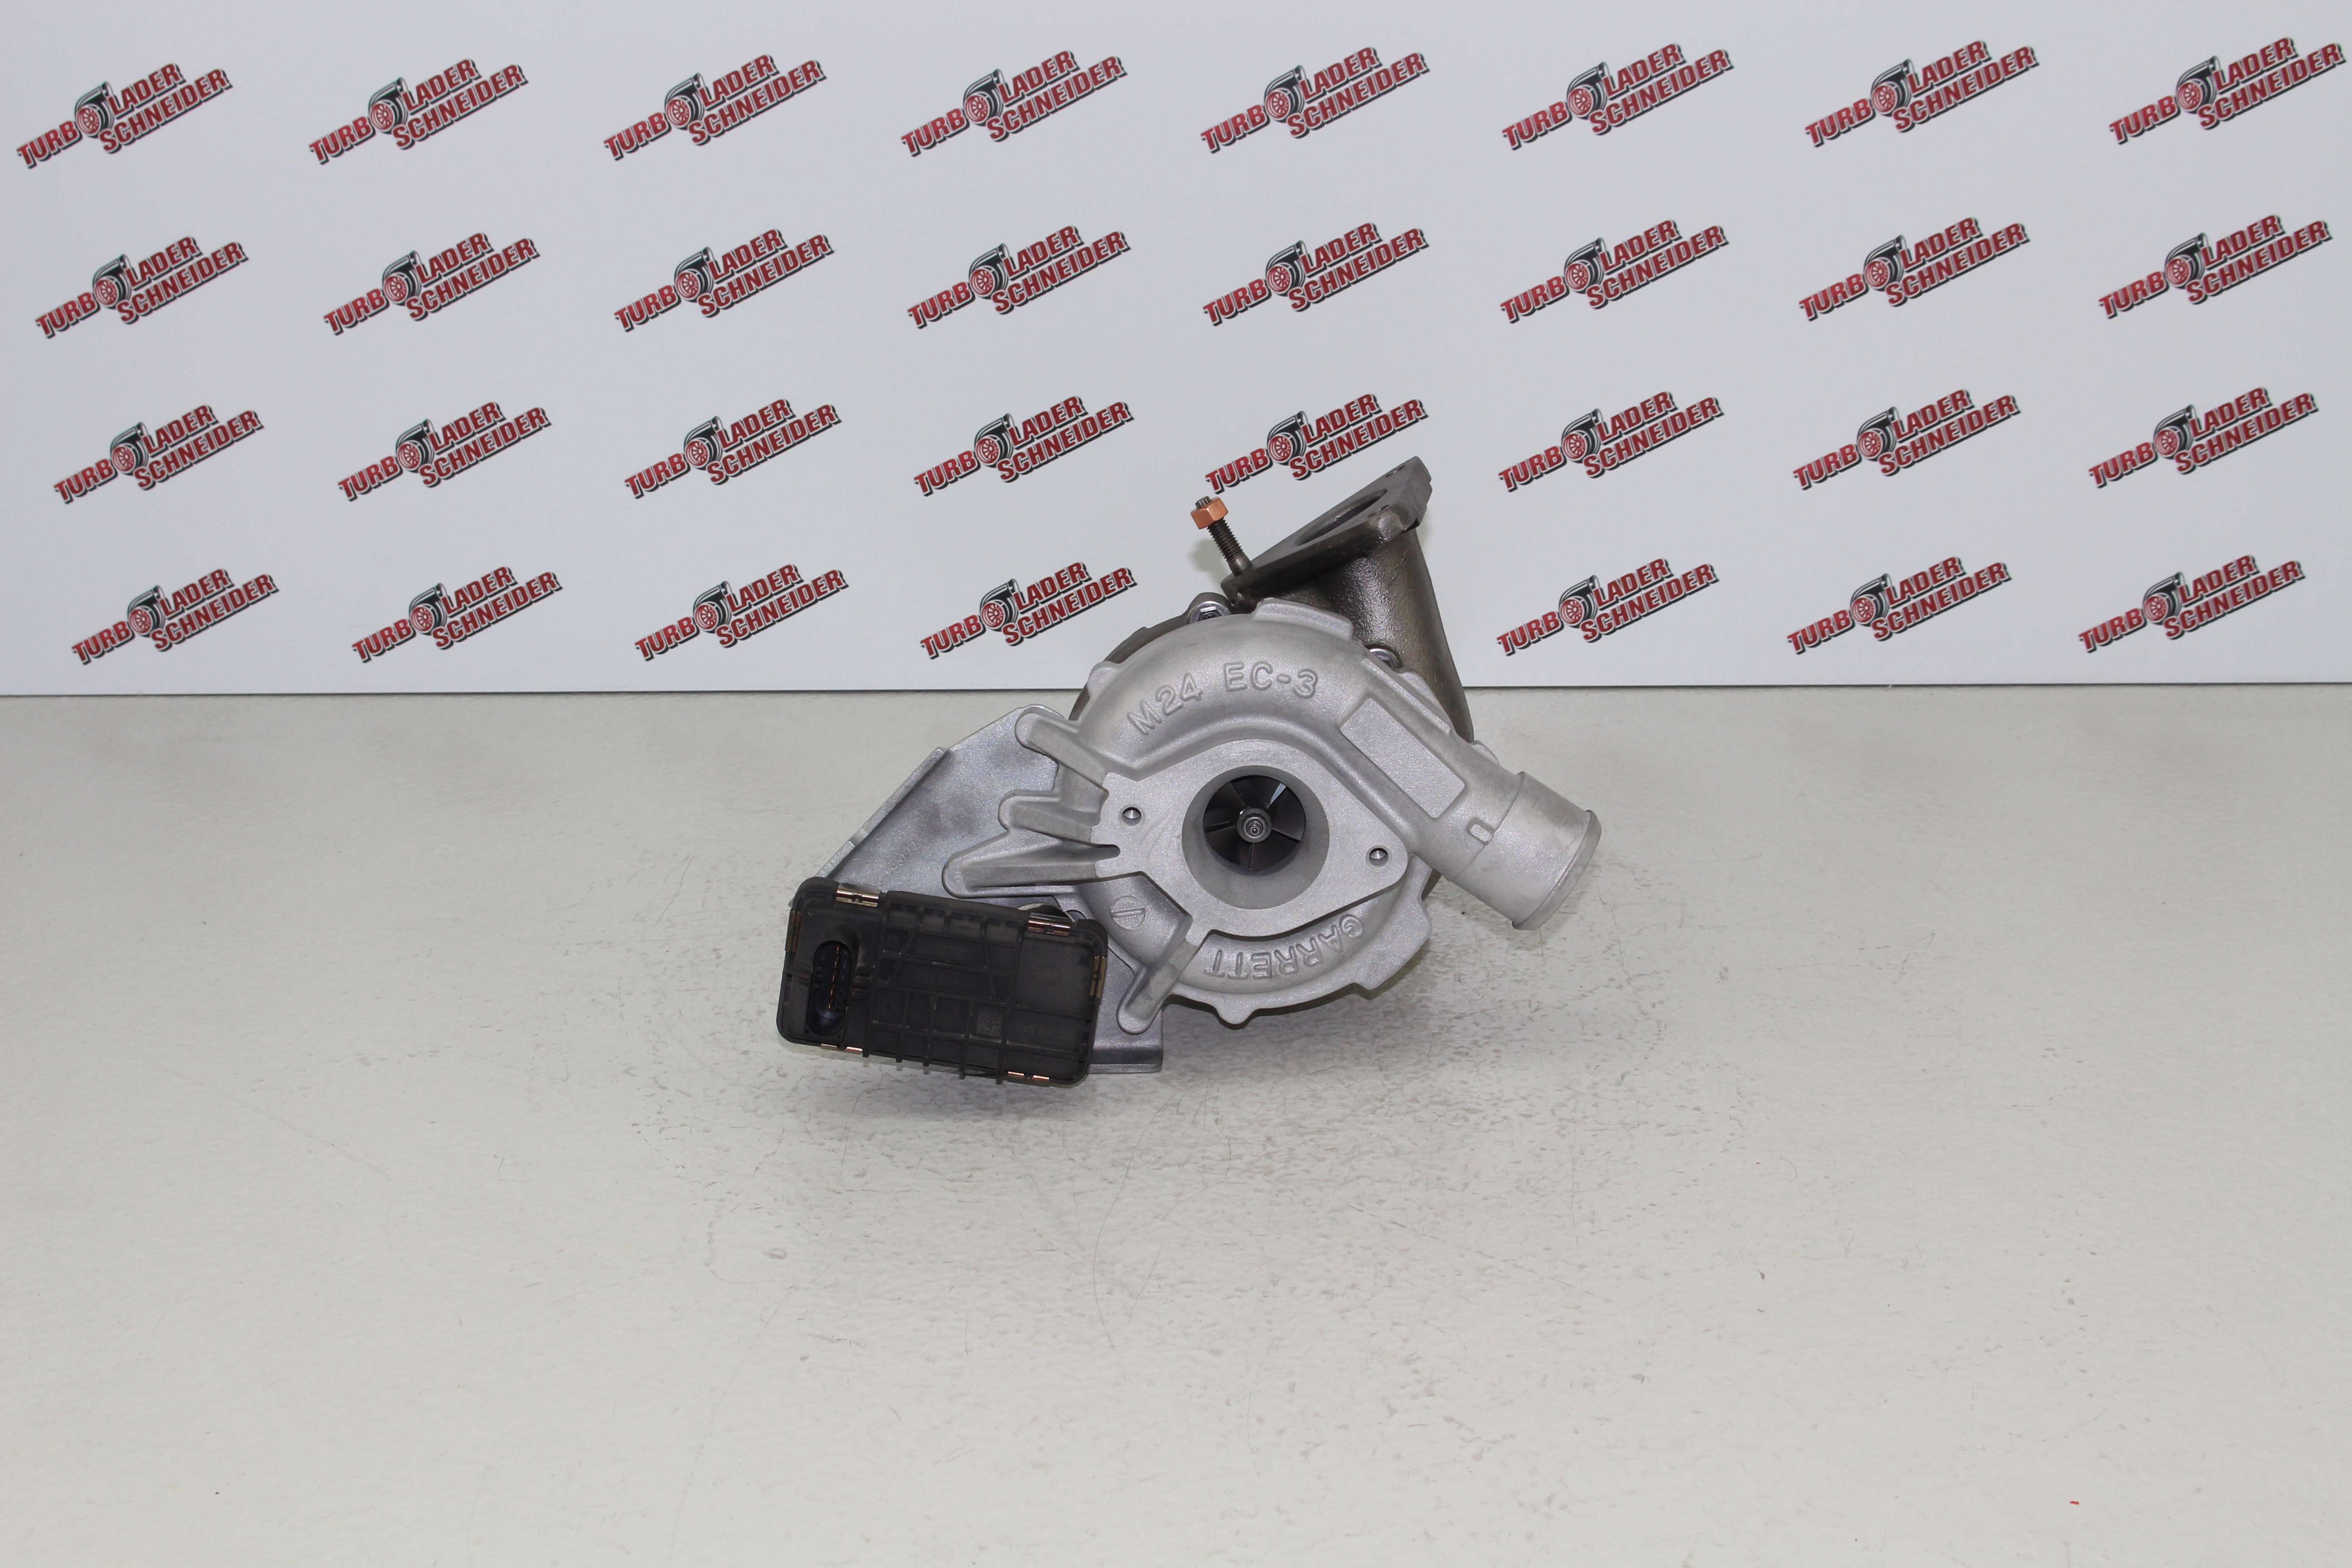 Turbolader Ford/Land Rover 2.4 TDCi/Td4 90-103 Kw